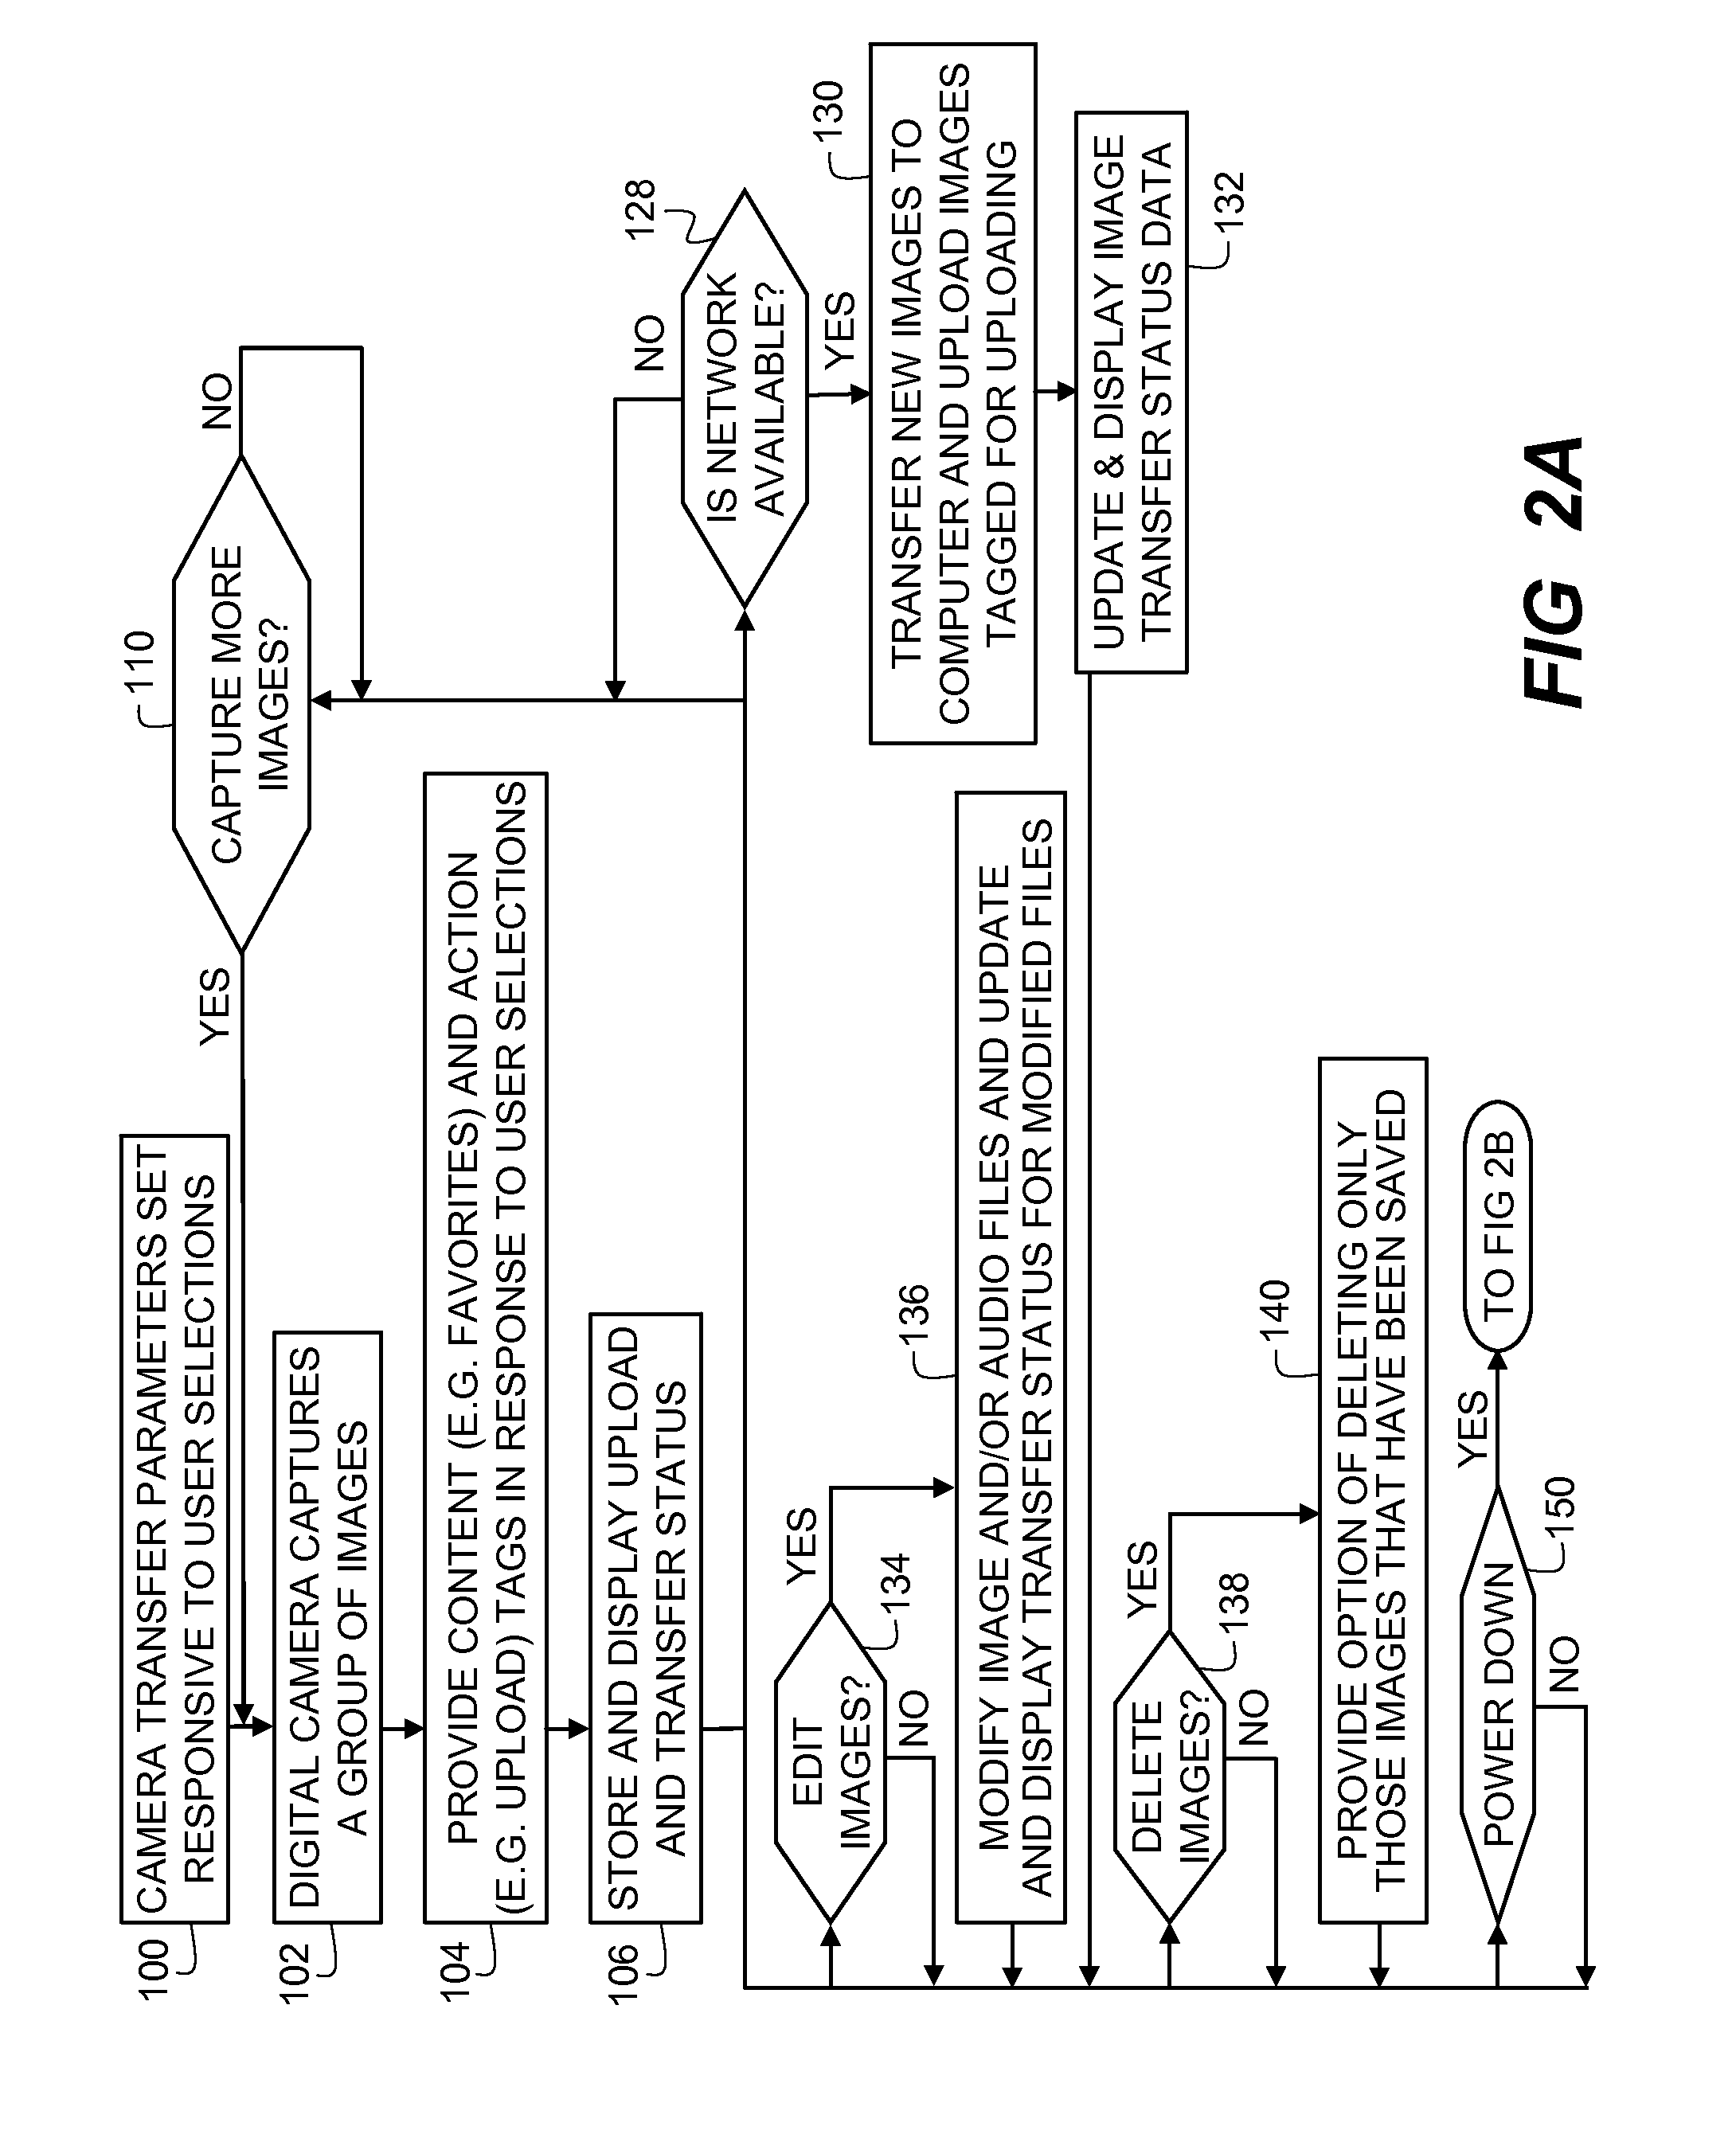 Wireless camera with automatic wake-up and transfer capability and transfer status display